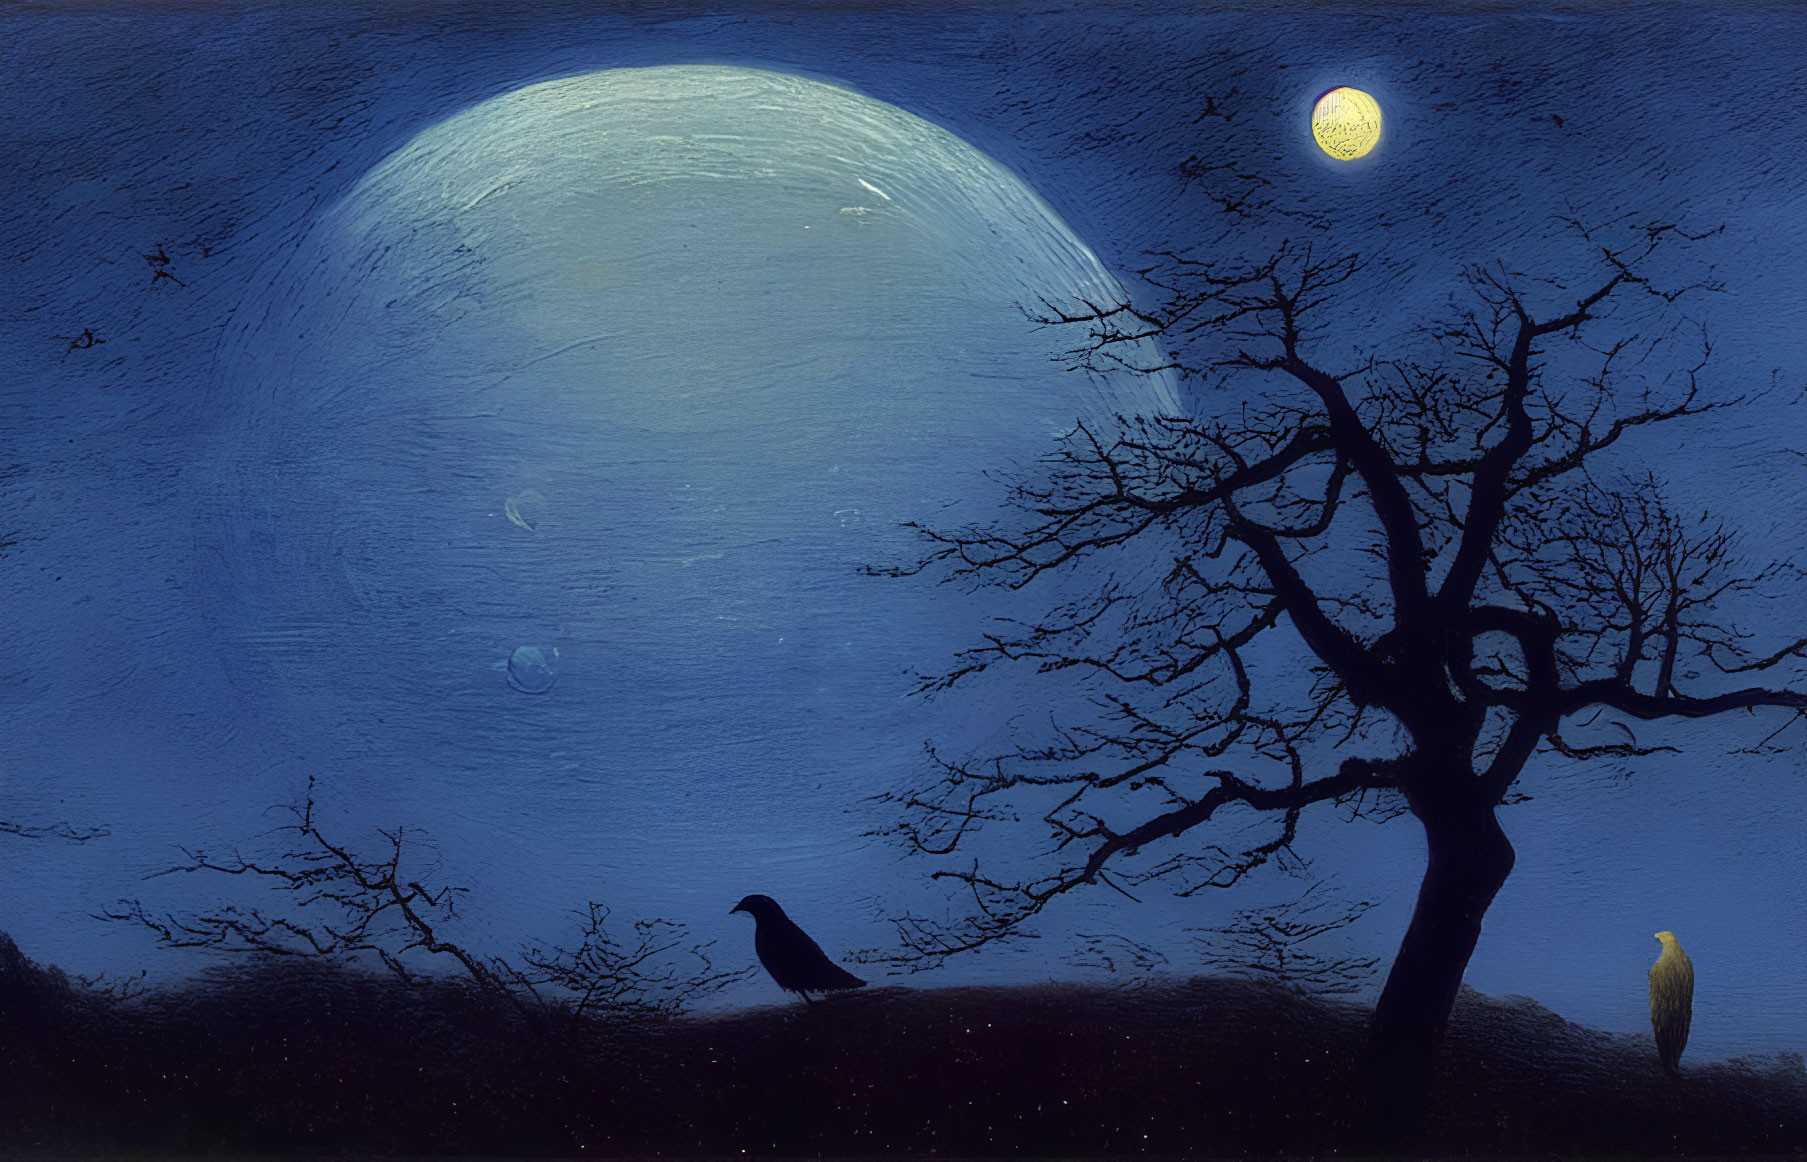 Surreal painting featuring moon, yellow orb, tree, birds, and bubbles